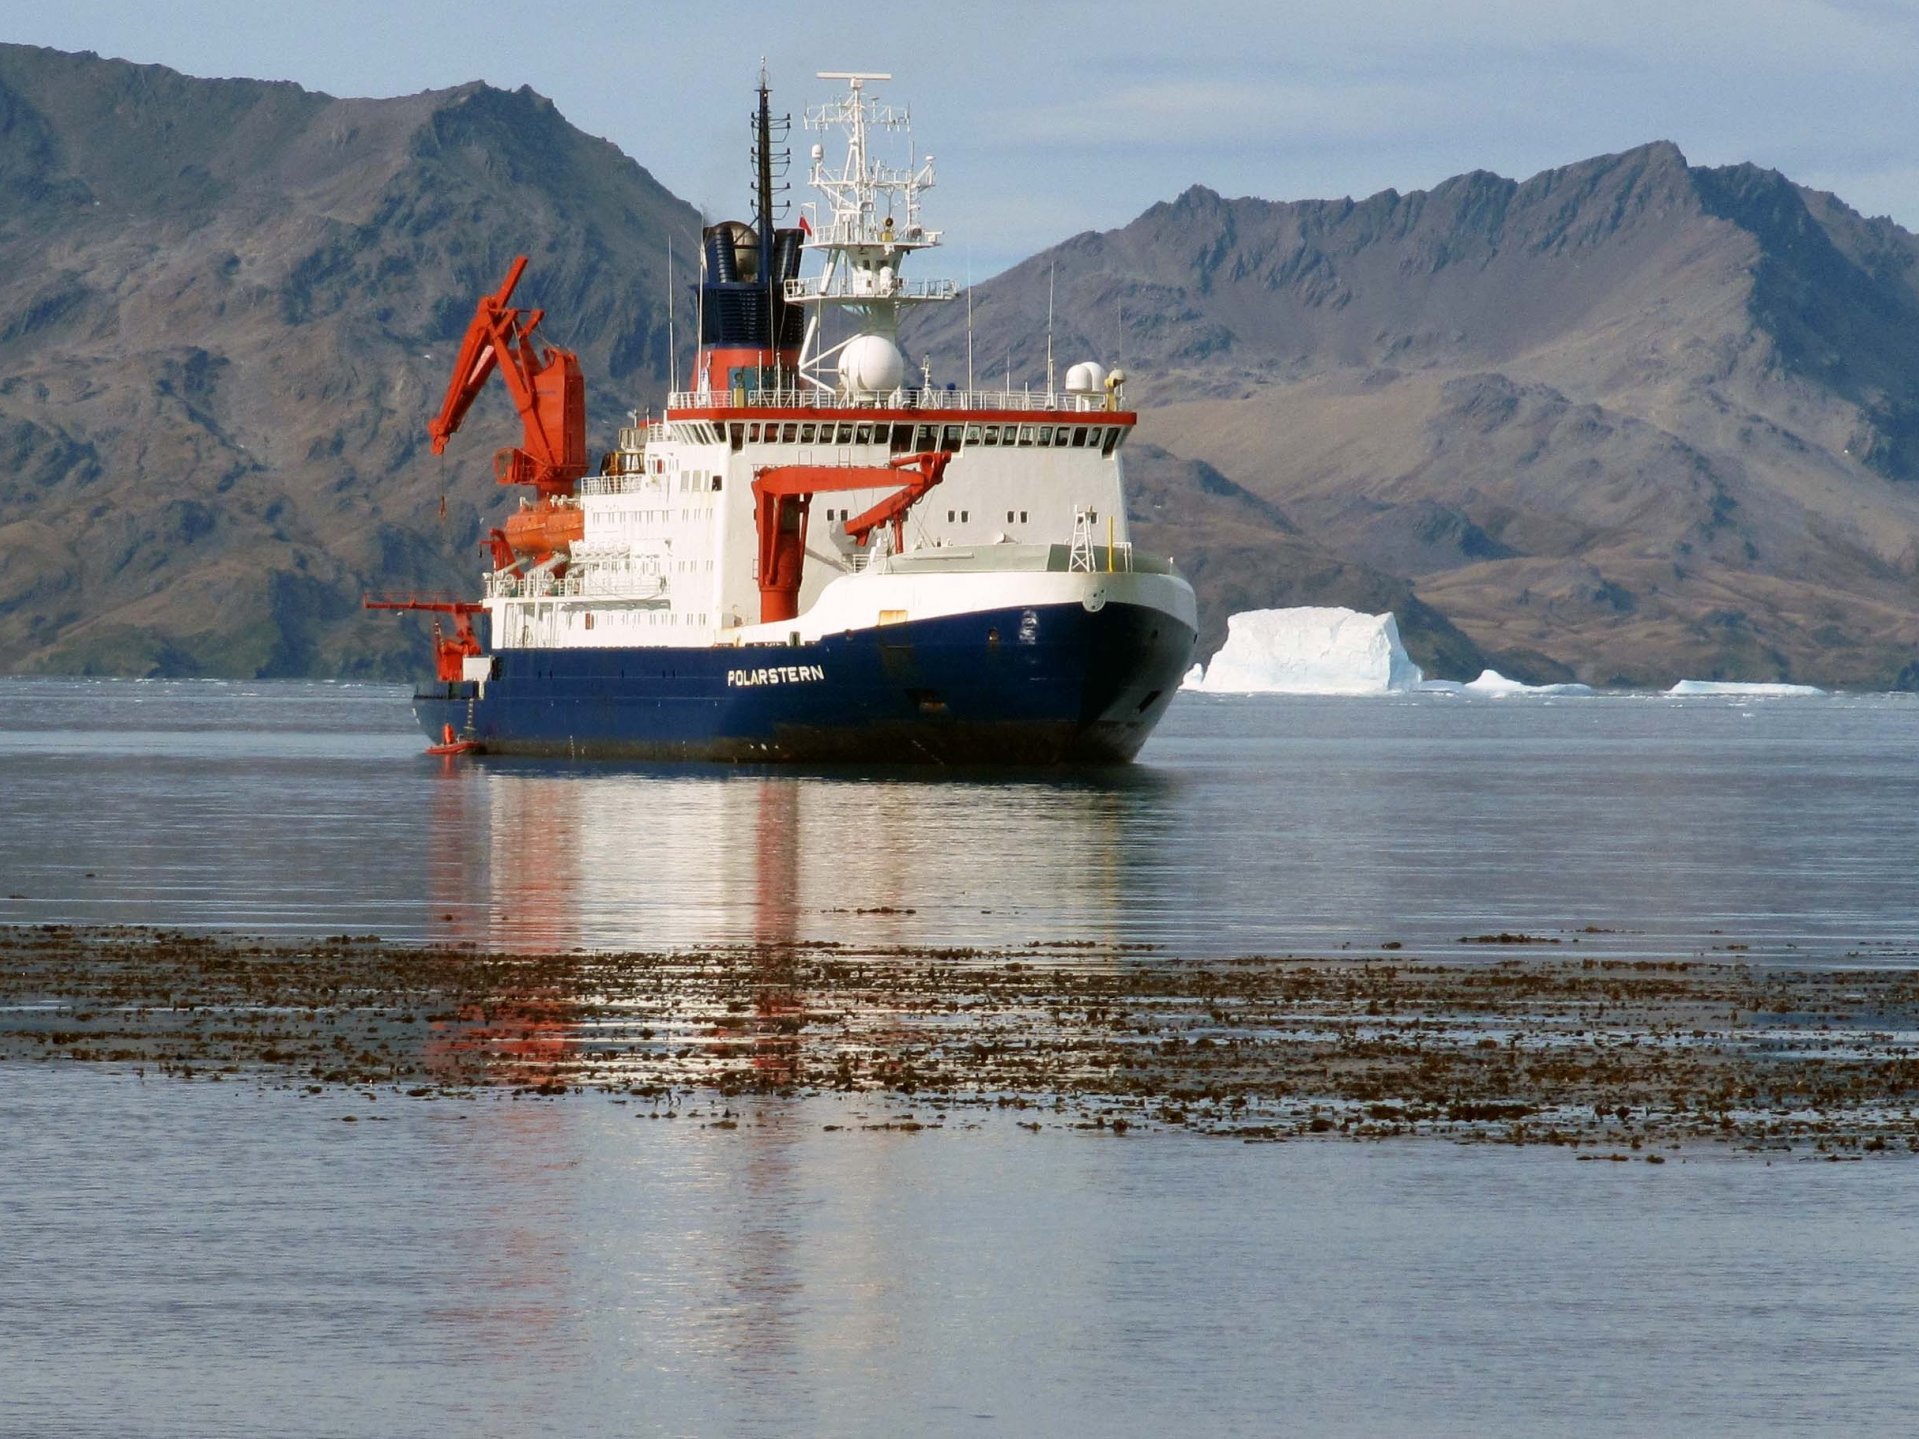 The Polarstern in the Cumberland Bay of South Georgia. Photo: vdl